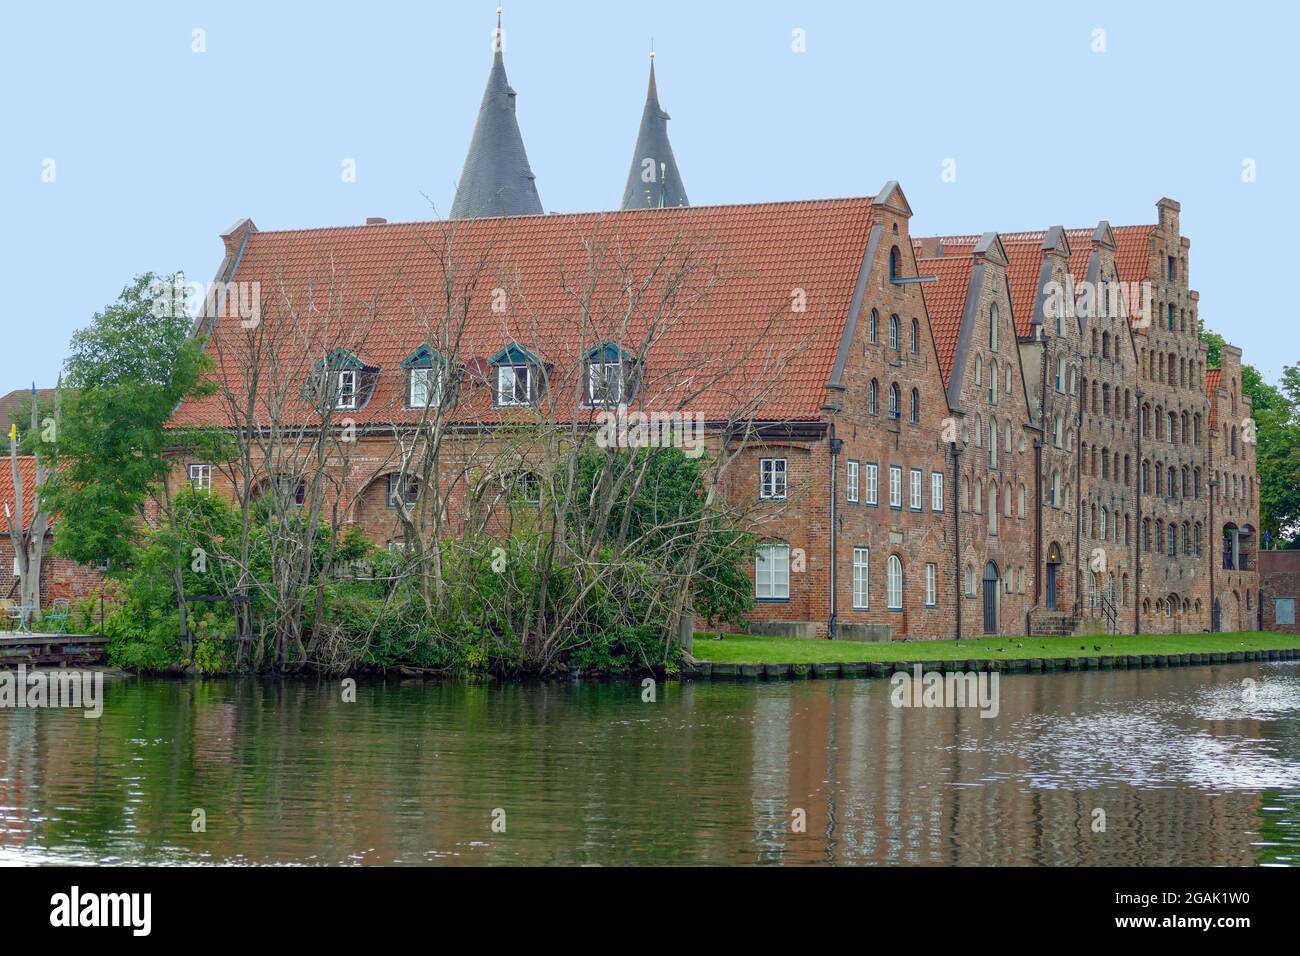 Salzspeicher in Luebeck, a hanseatic city in Northern Germany Stock Photo